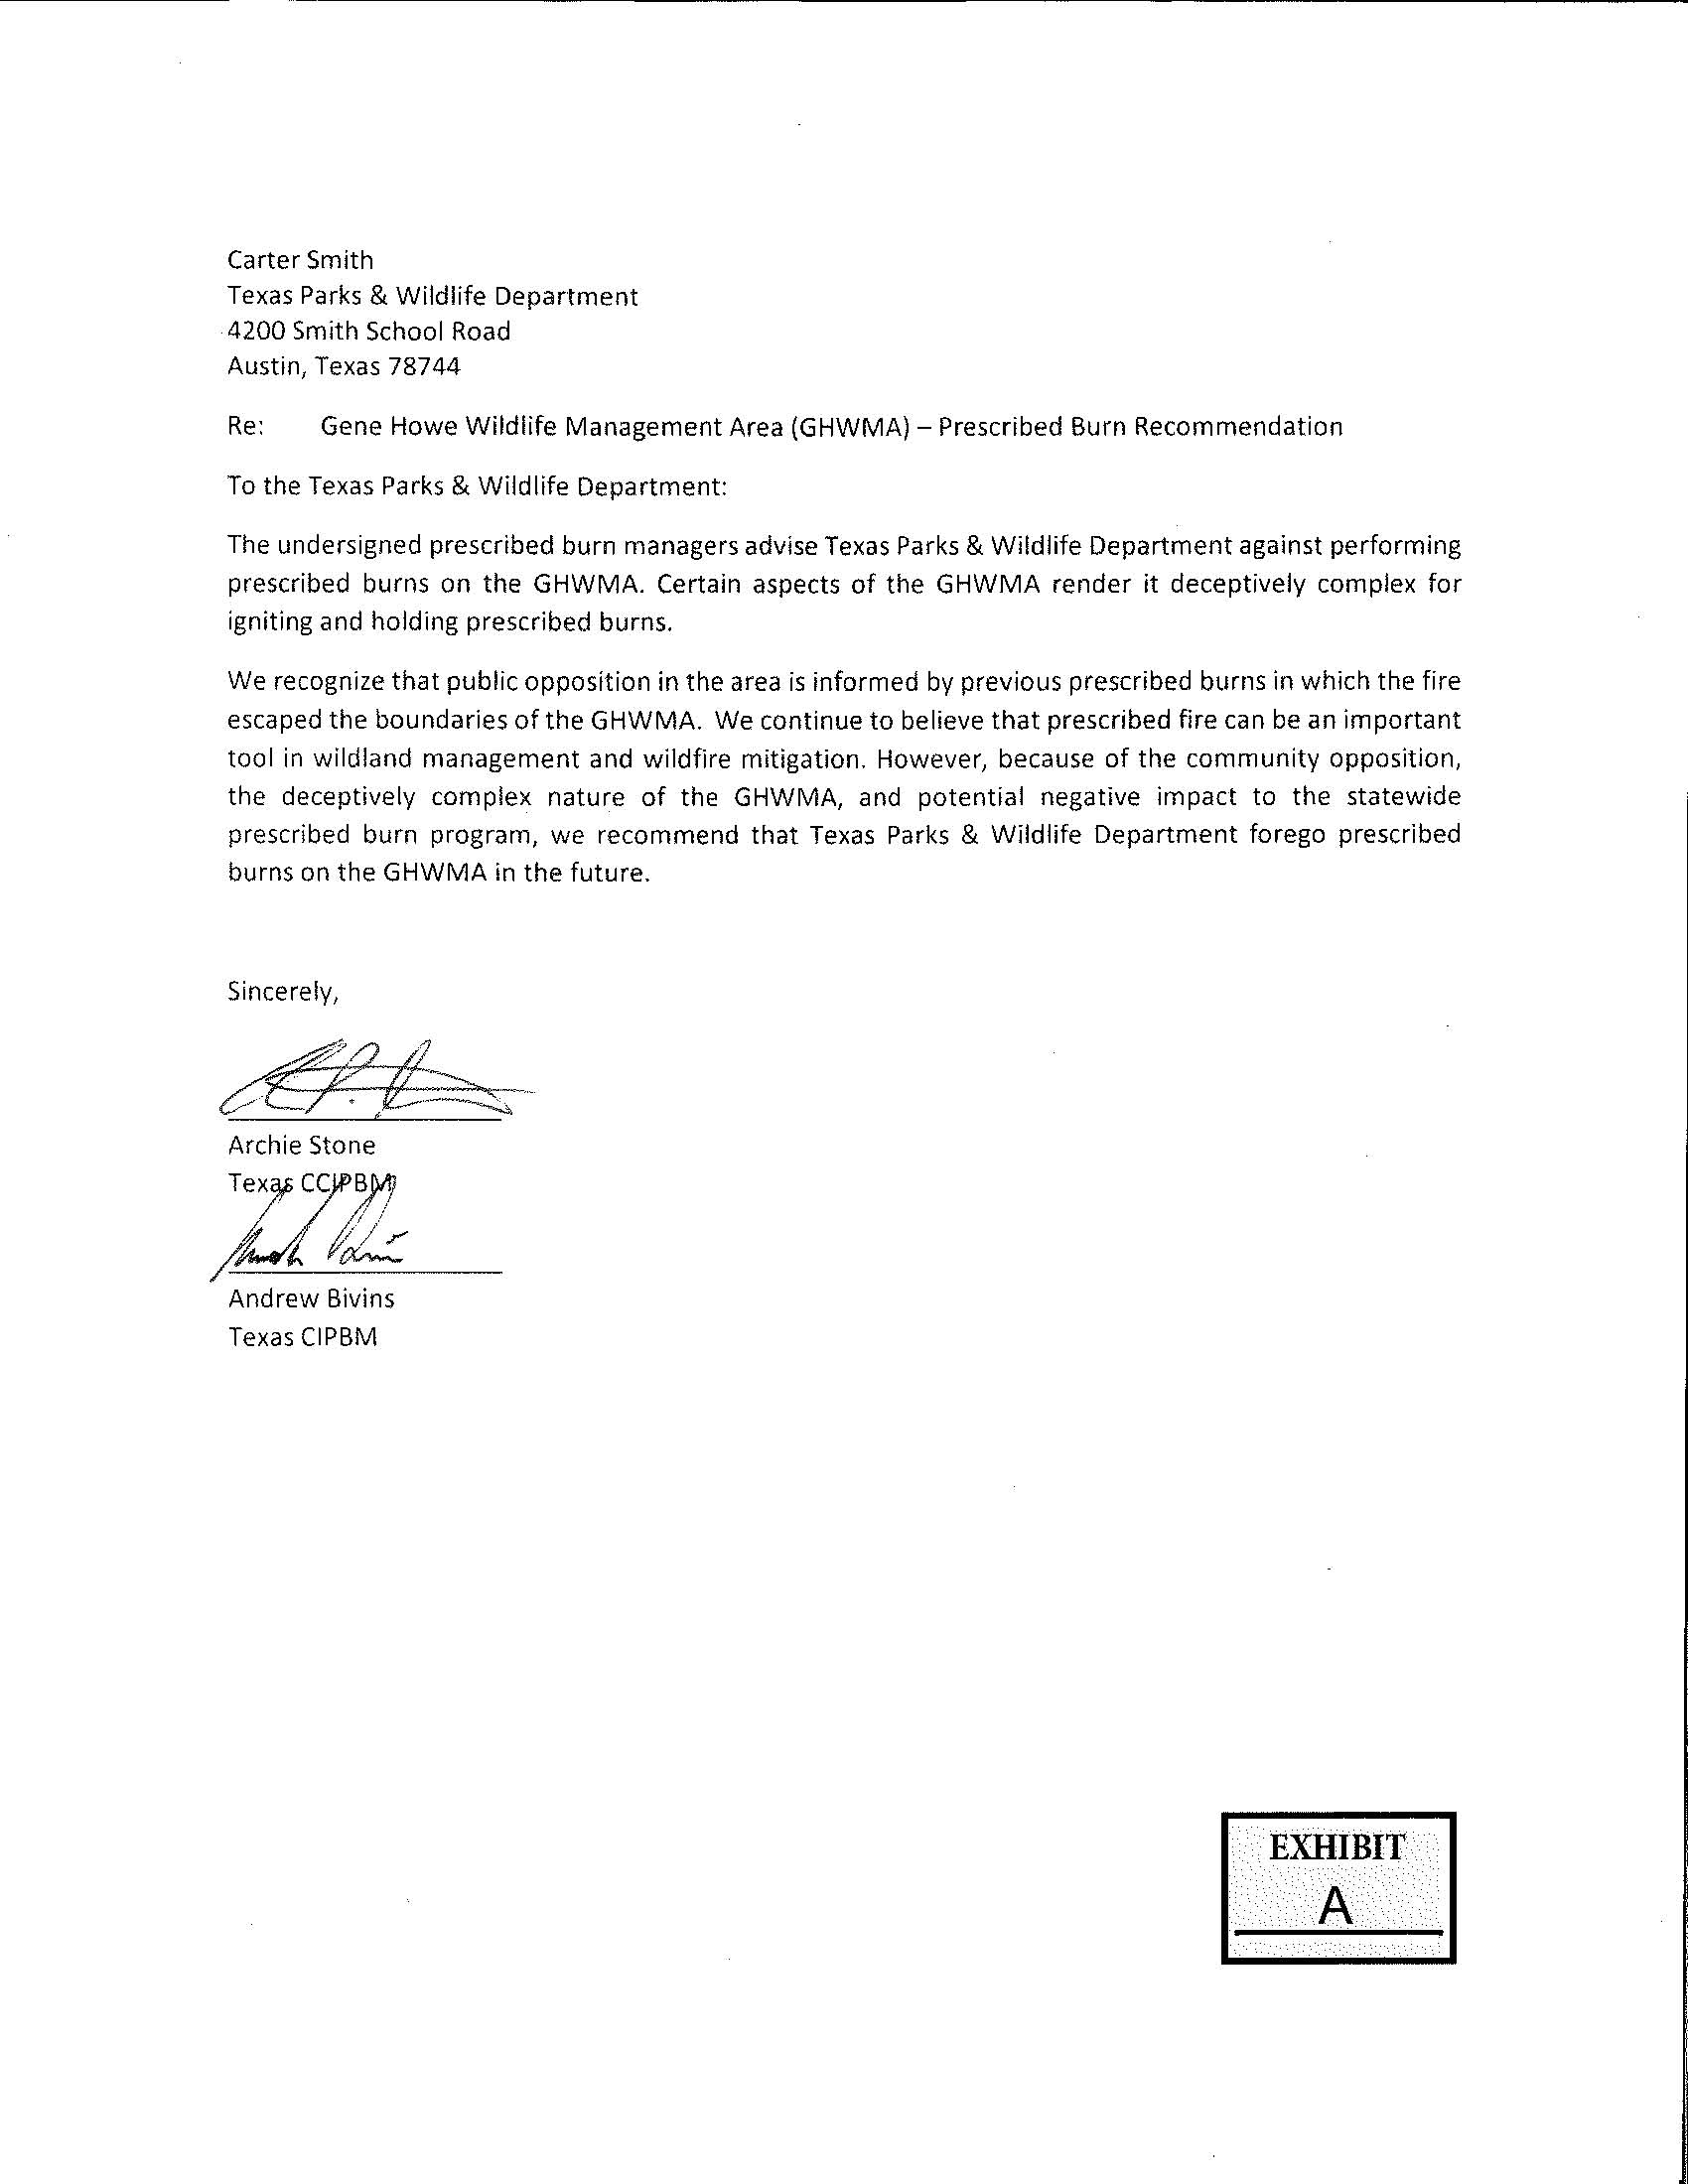 Letter to TPWD re: prescribed burn